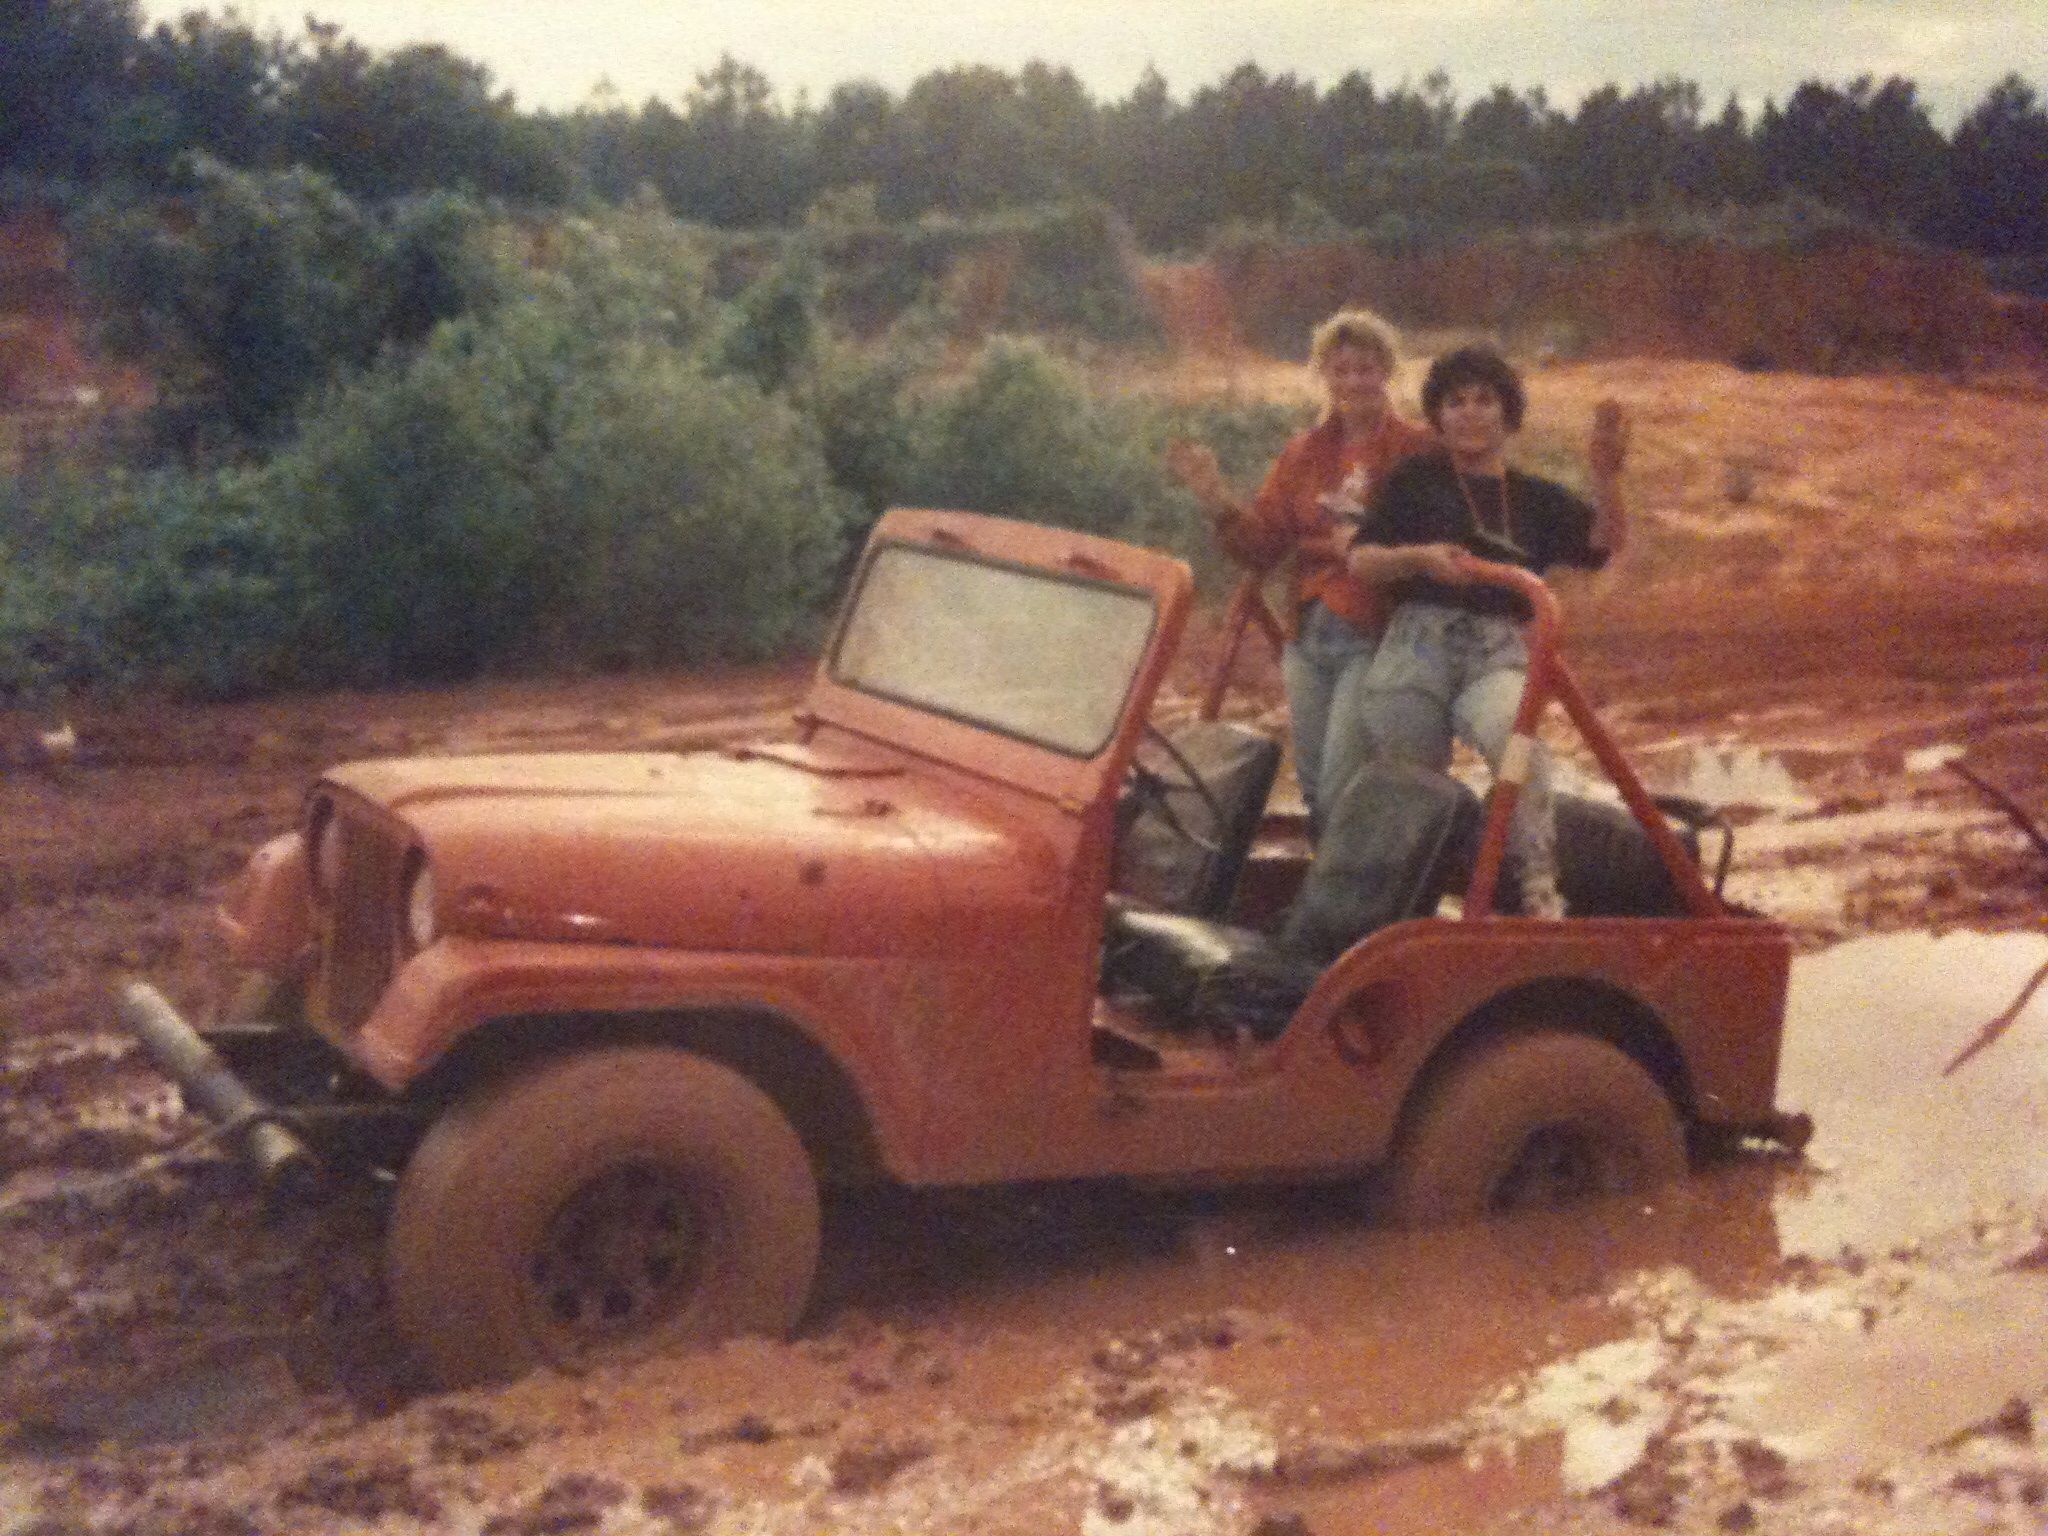 1990 - Troy, AL (Home) - Just bought my 1955 Willys Jeep, stuck in the mud pit. (I'm in the red shirt)